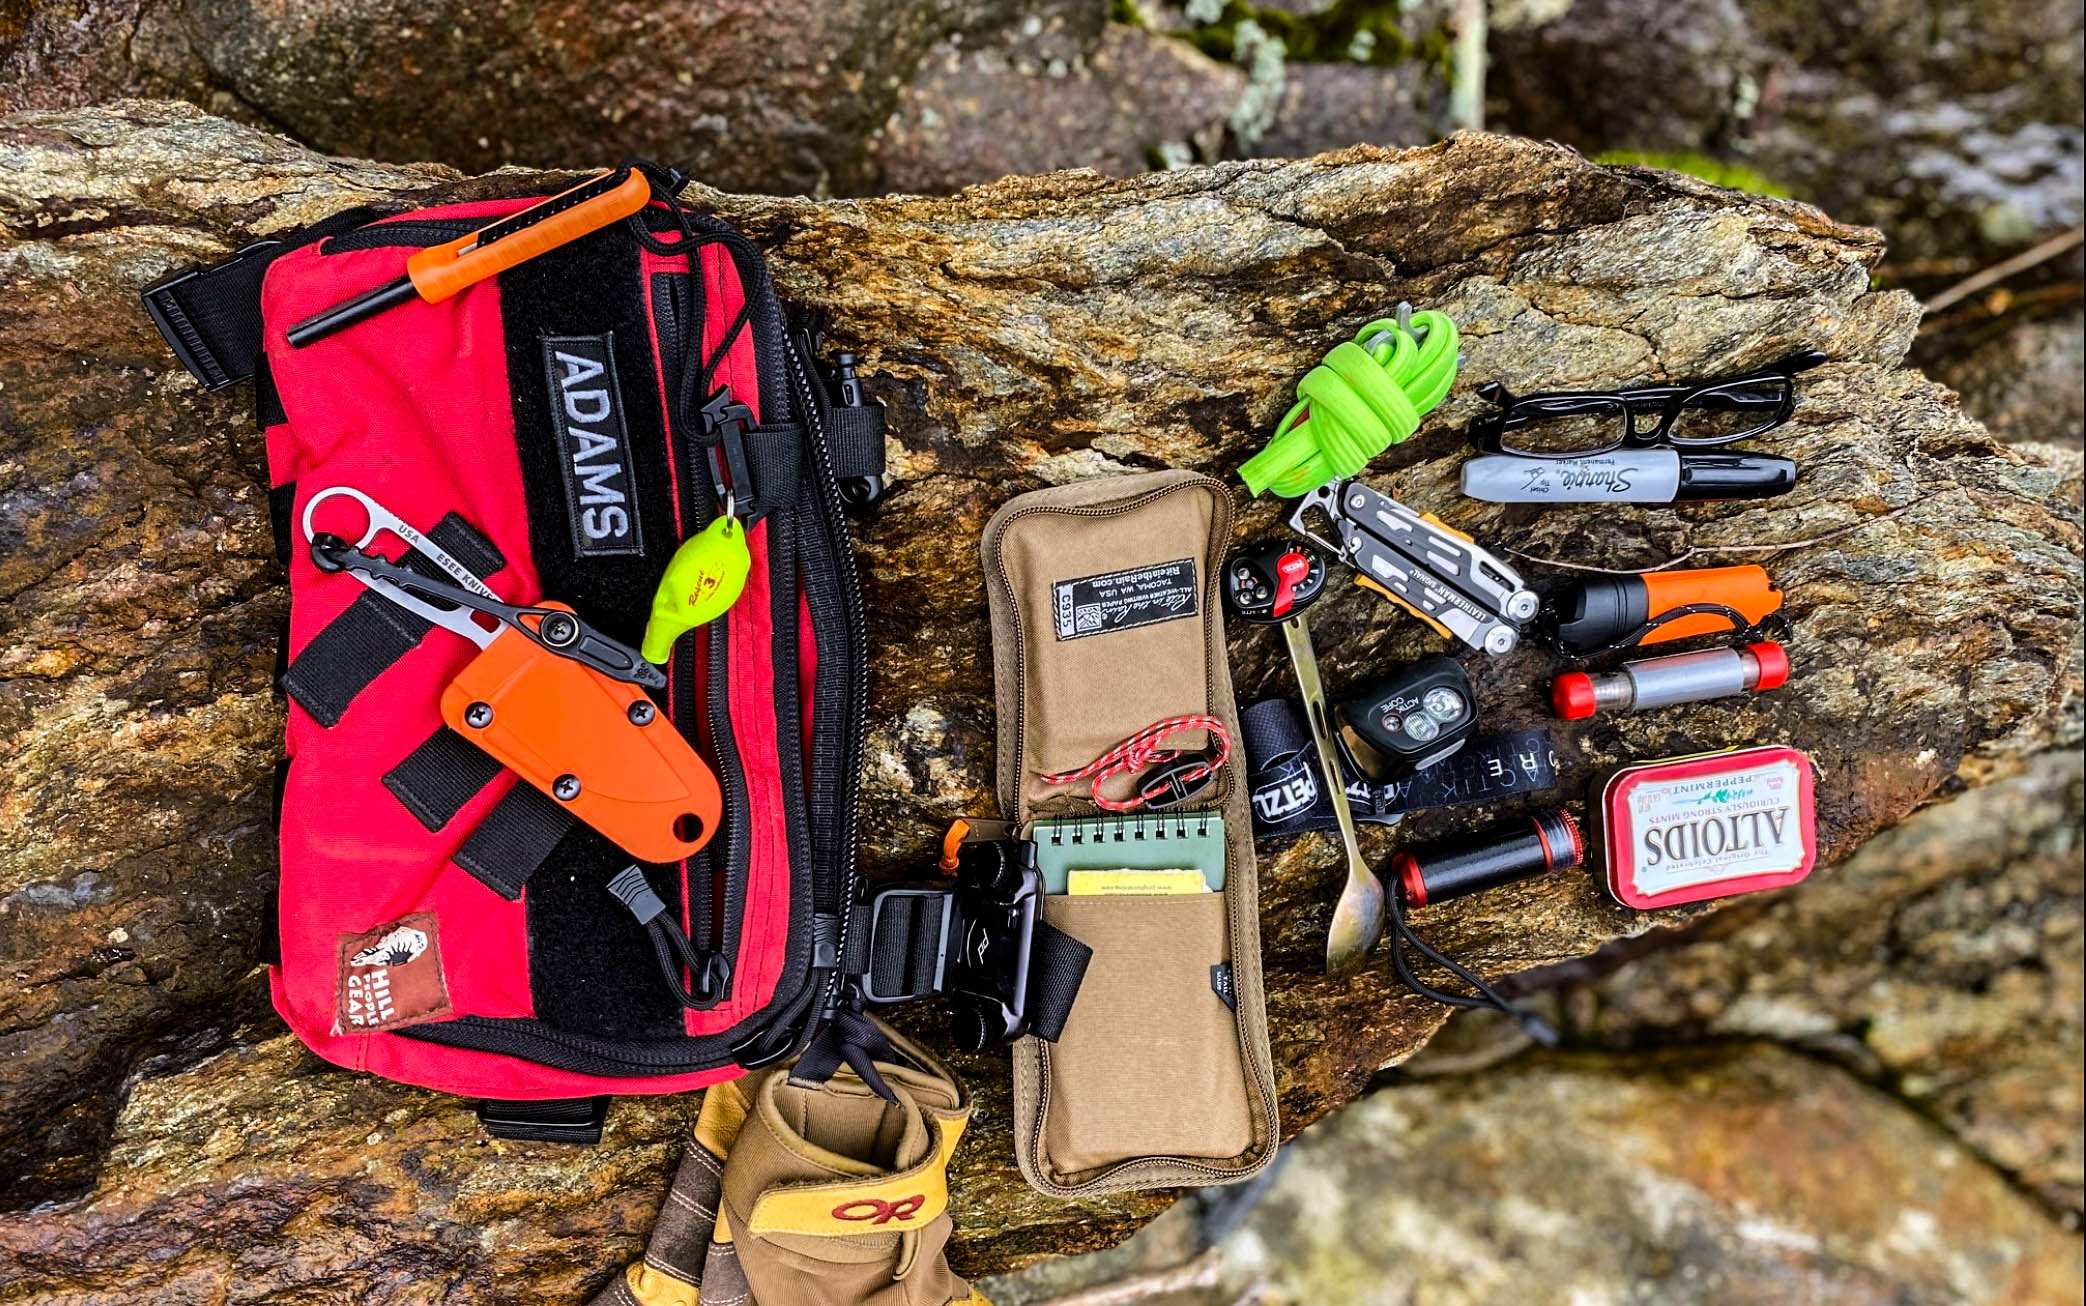 Survival kit laid out on a log.